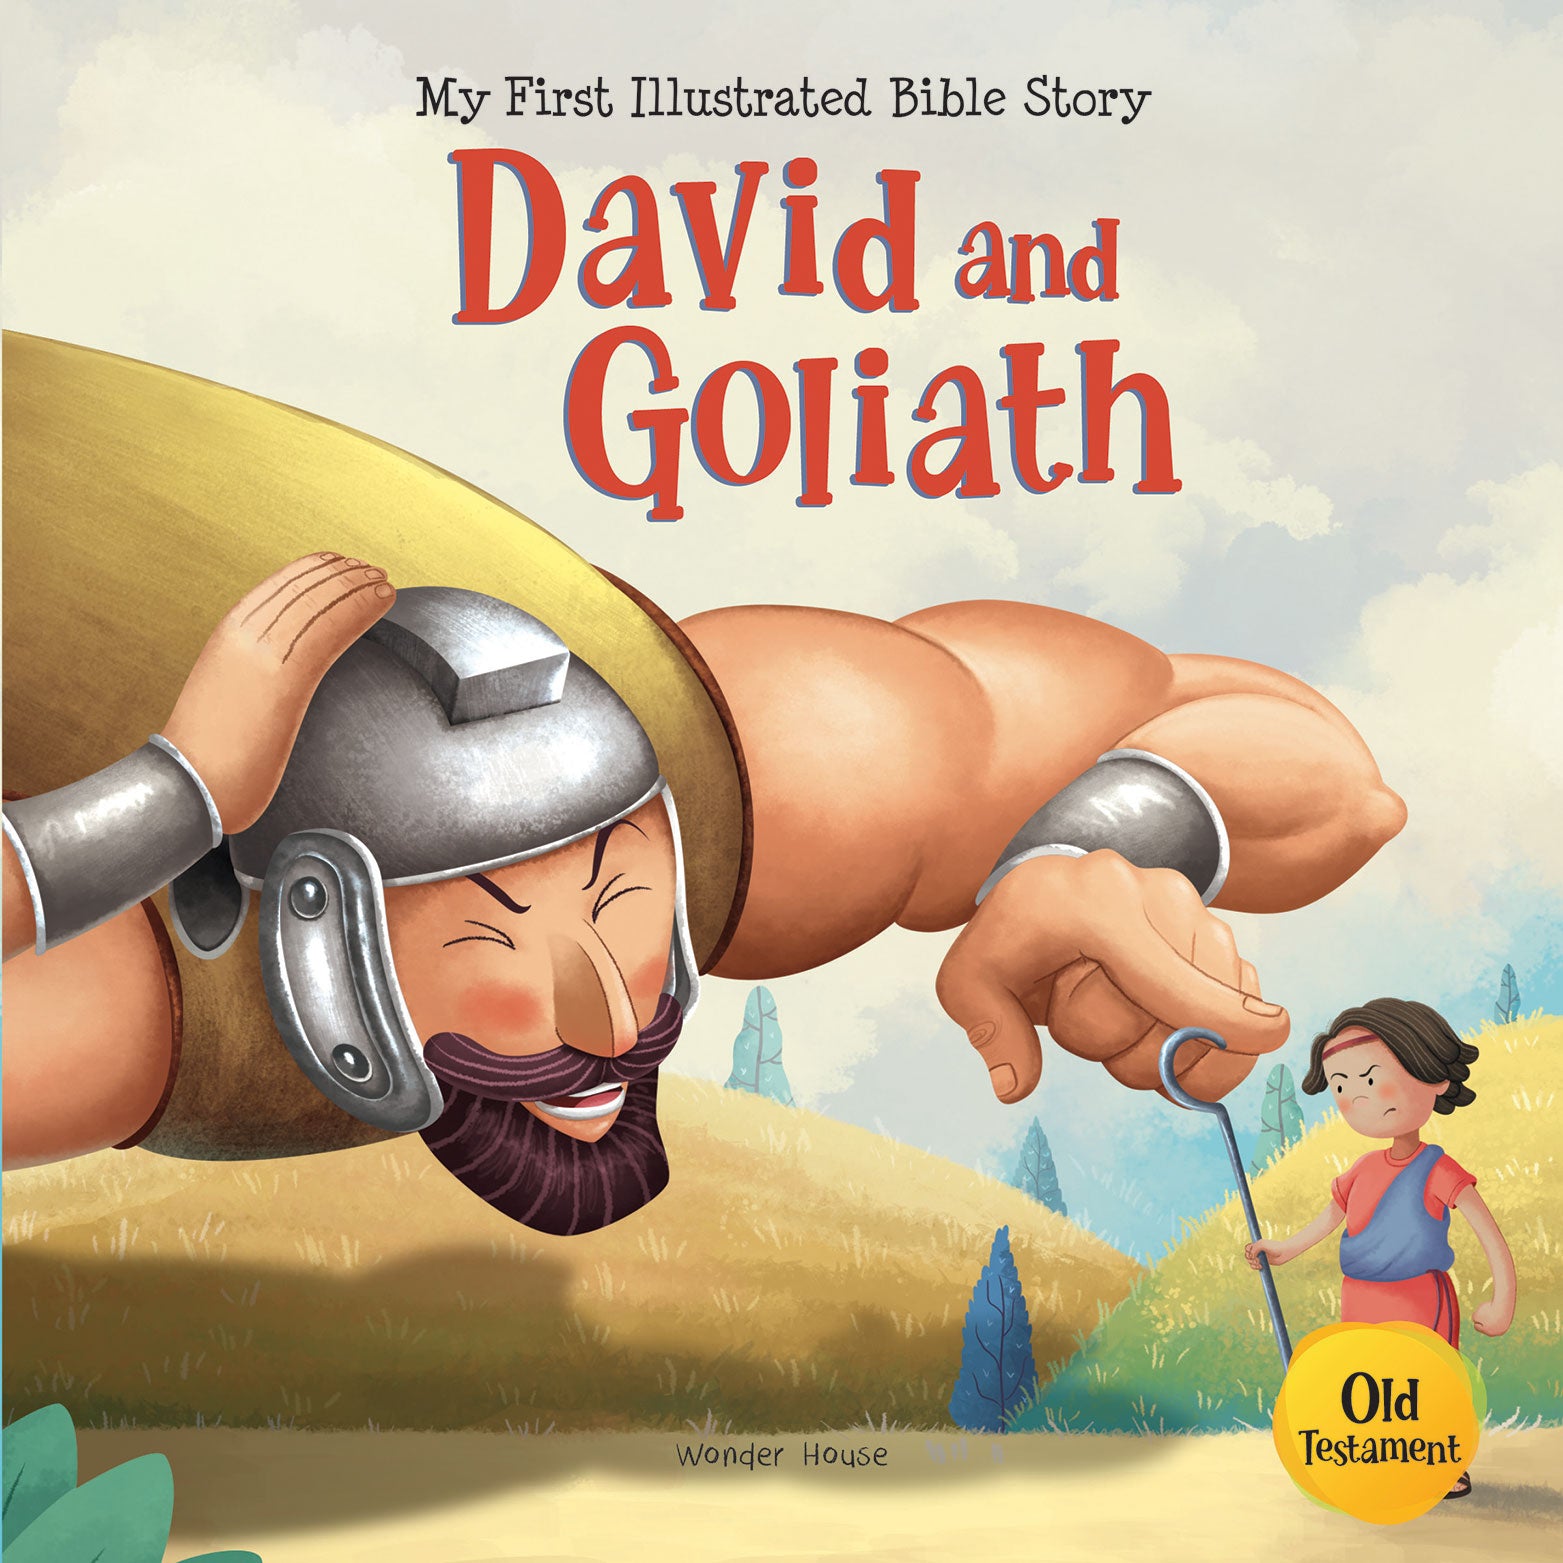 My First Illustrated Bible Story: David and Goliath